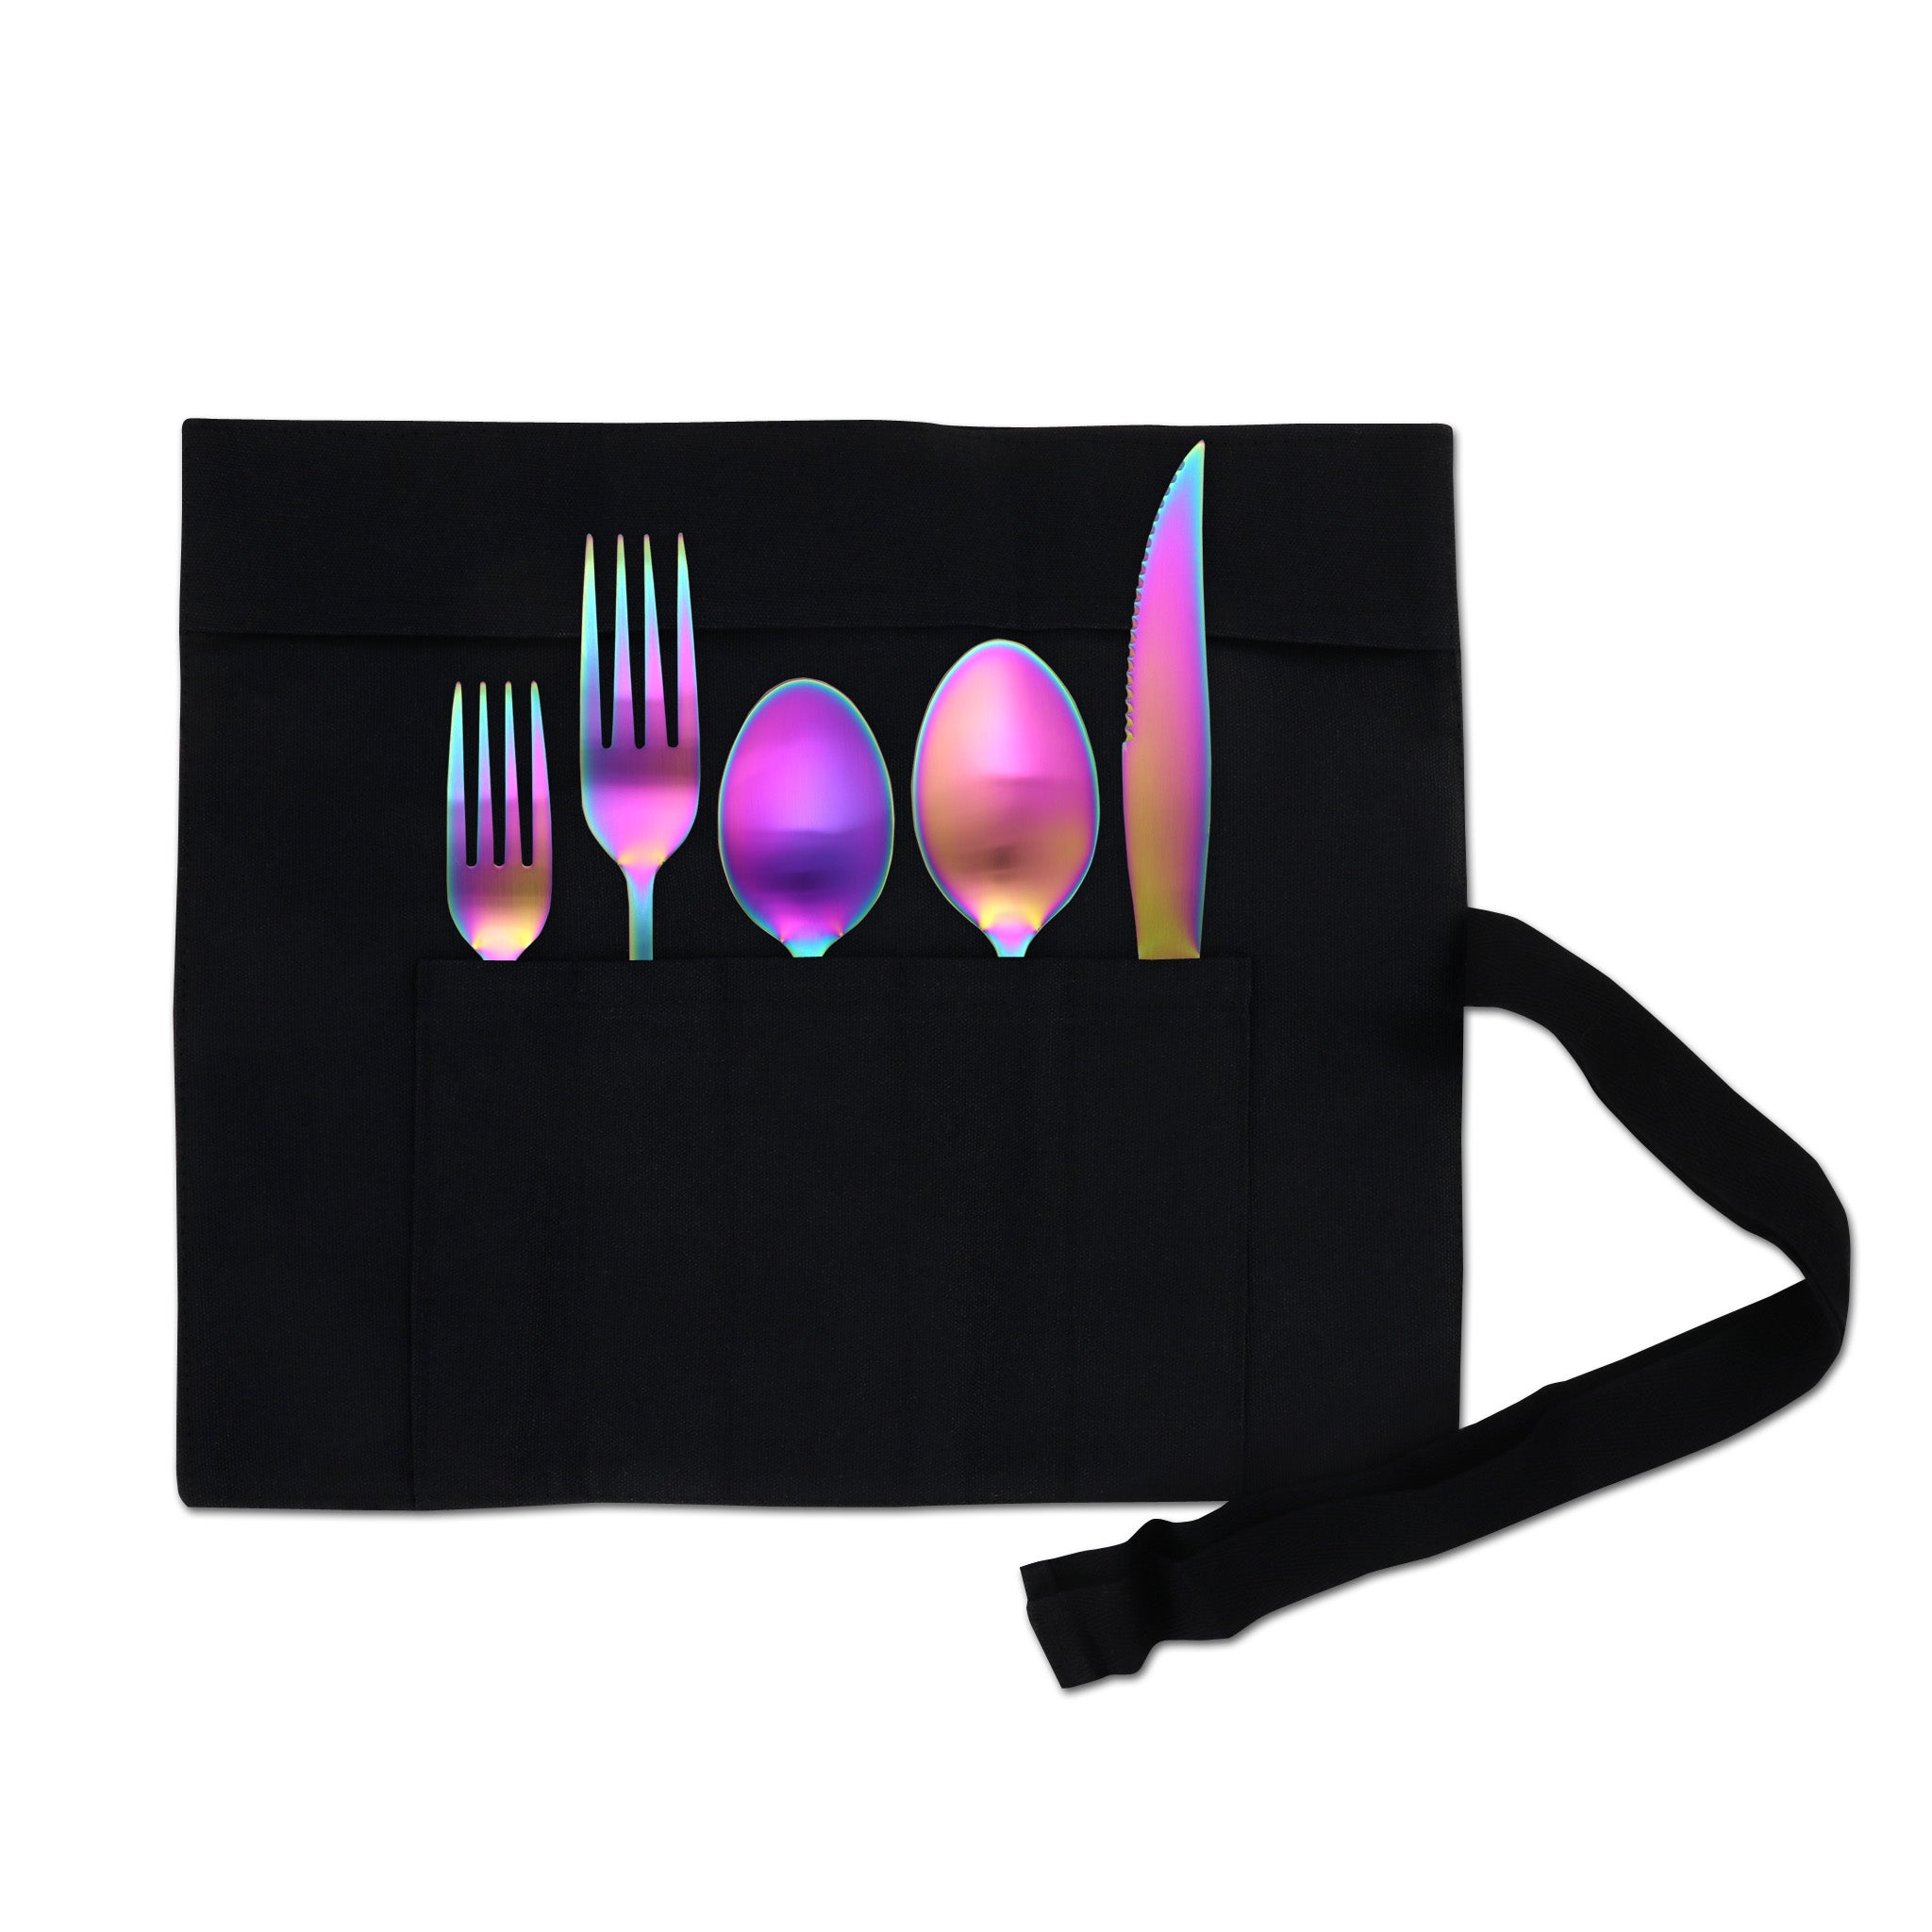 Traditional Deluxe Travel Flatware Set with Steak Knife (Satin Rainbow)